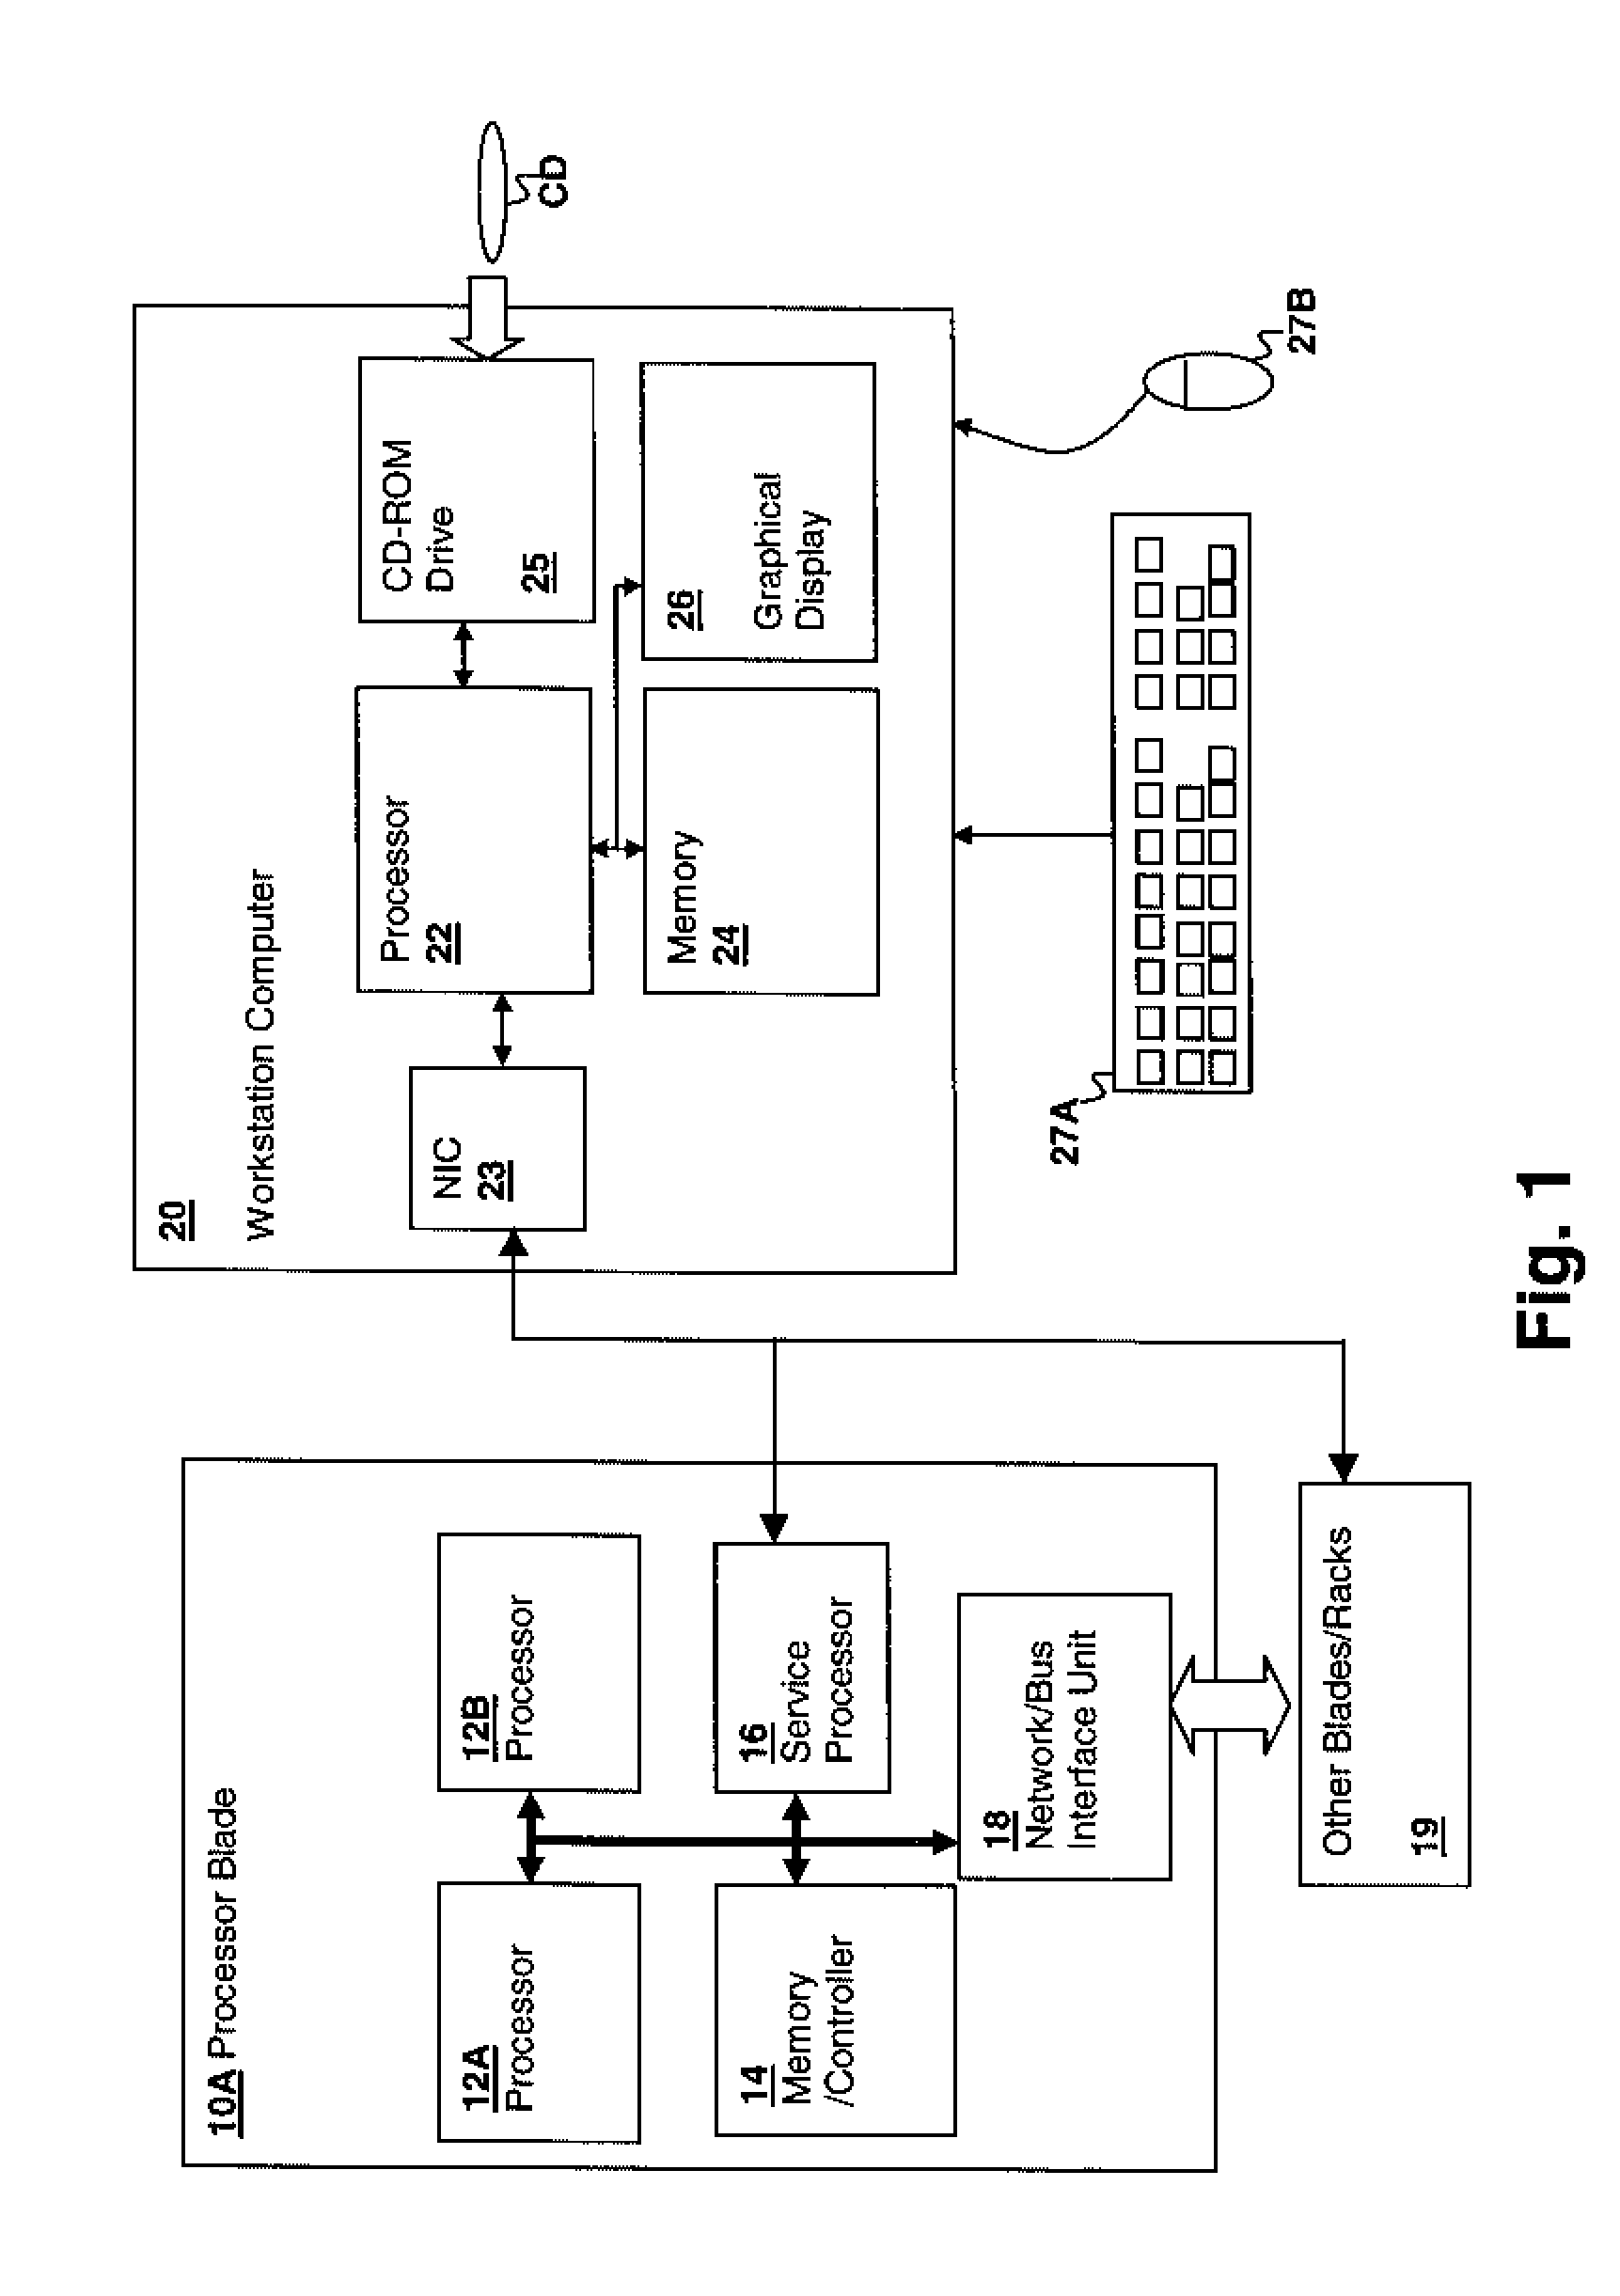 Executable High-Level Trace File Generation System and Method